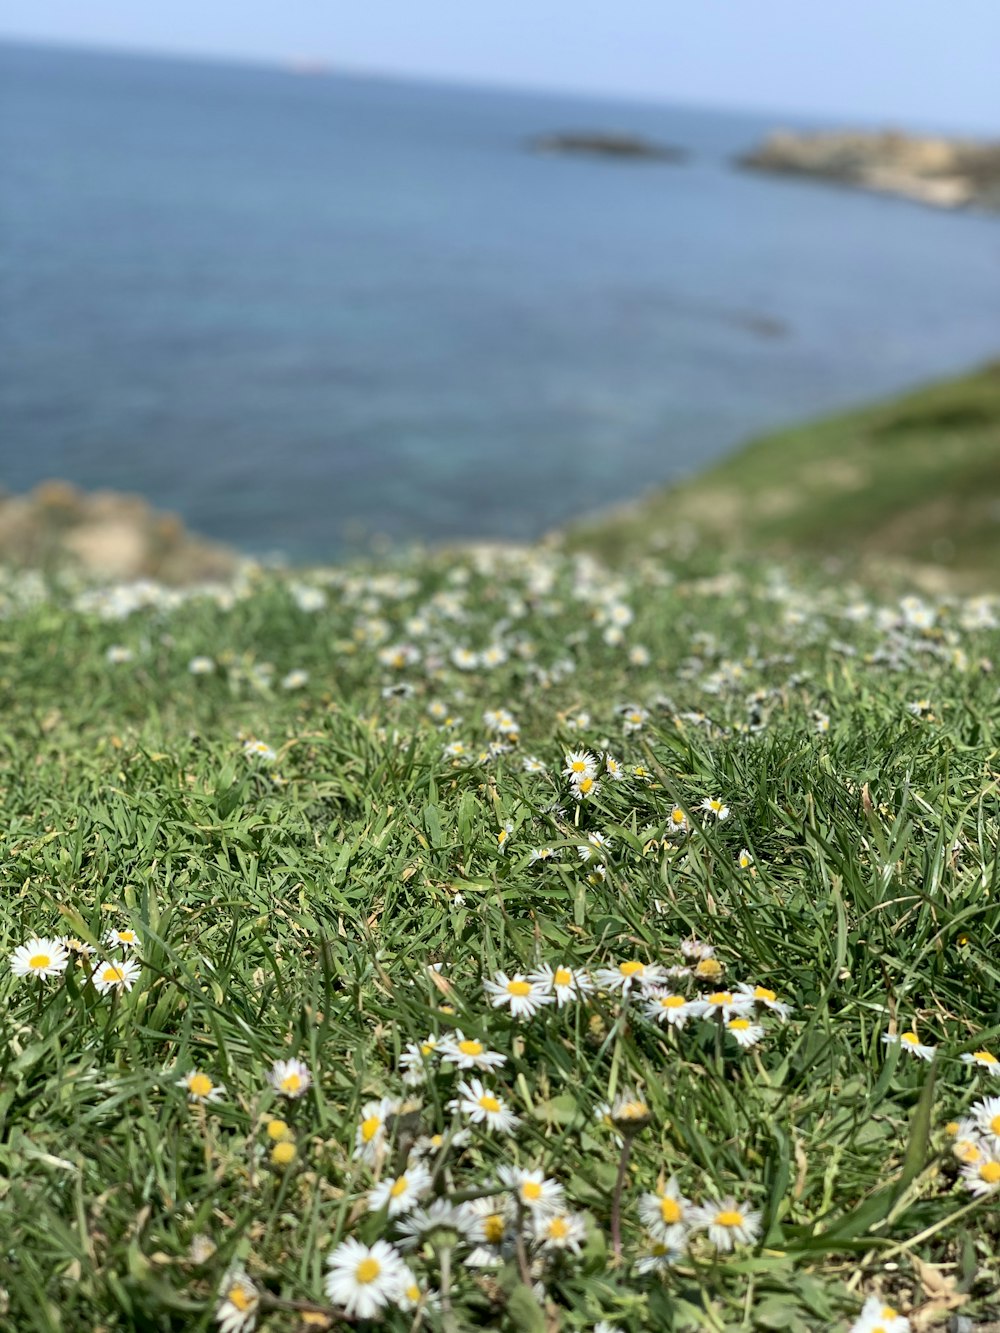 white and yellow flowers on green grass field near body of water during daytime